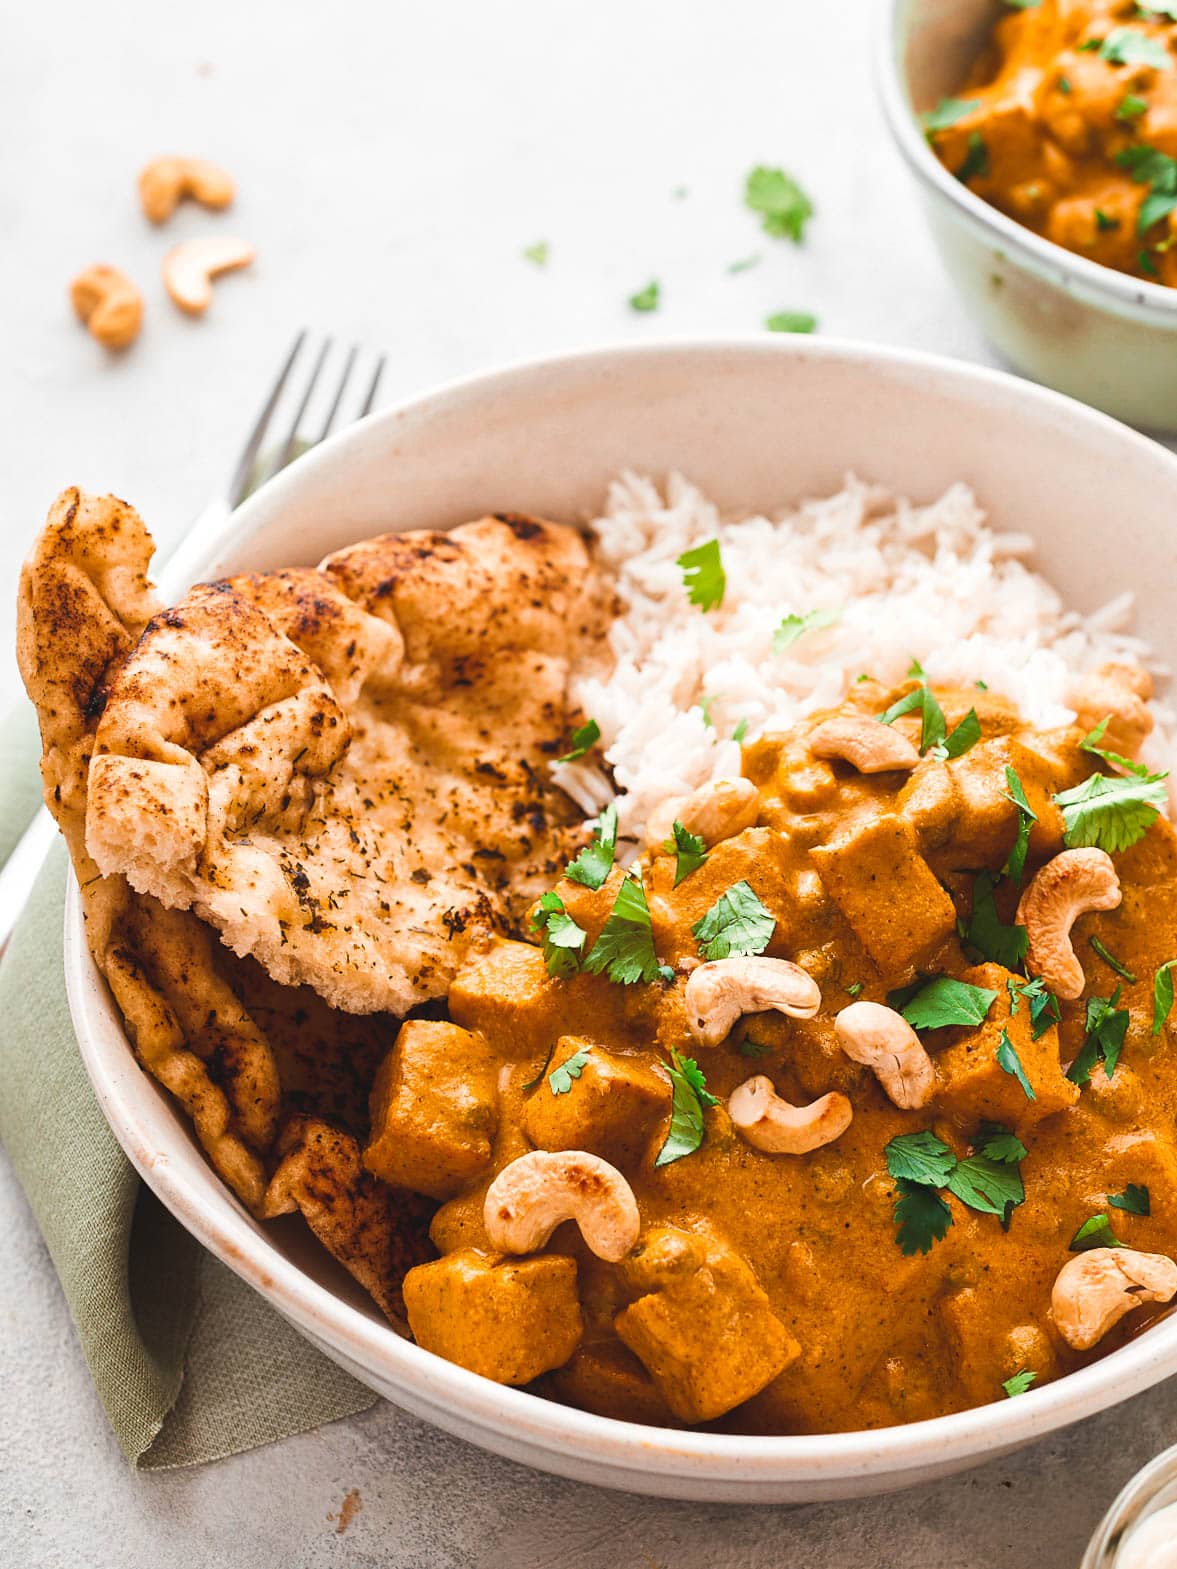 Vegan shahi korma in a bowl with rice and coriander